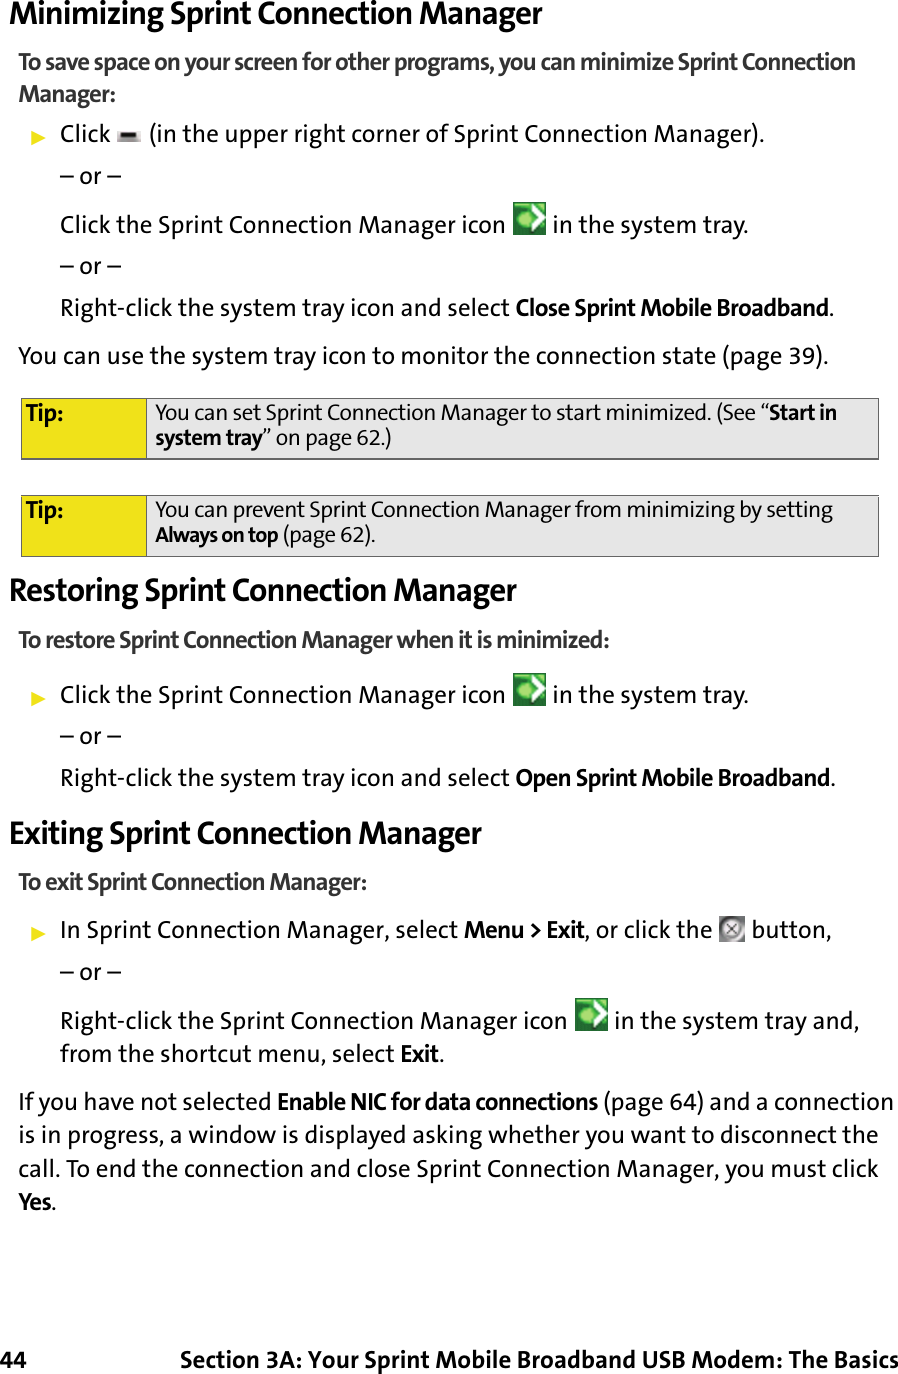 44 Section 3A: Your Sprint Mobile Broadband USB Modem: The BasicsMinimizing Sprint Connection ManagerTo save space on your screen for other programs, you can minimize Sprint Connection Manager:䊳Click   (in the upper right corner of Sprint Connection Manager).– or –Click the Sprint Connection Manager icon   in the system tray.– or –Right-click the system tray icon and select Close Sprint Mobile Broadband.You can use the system tray icon to monitor the connection state (page 39).Restoring Sprint Connection ManagerTo restore Sprint Connection Manager when it is minimized:䊳Click the Sprint Connection Manager icon   in the system tray. – or –Right-click the system tray icon and select Open Sprint Mobile Broadband.Exiting Sprint Connection ManagerTo exit Sprint Connection Manager:䊳In Sprint Connection Manager, select Menu &gt; Exit, or click the   button,– or –Right-click the Sprint Connection Manager icon   in the system tray and, from the shortcut menu, select Exit.If you have not selected Enable NIC for data connections (page 64) and a connection is in progress, a window is displayed asking whether you want to disconnect the call. To end the connection and close Sprint Connection Manager, you must click Yes.Tip: You can set Sprint Connection Manager to start minimized. (See “Start in system tray” on page 62.)Tip: You can prevent Sprint Connection Manager from minimizing by setting Always on top (page 62).